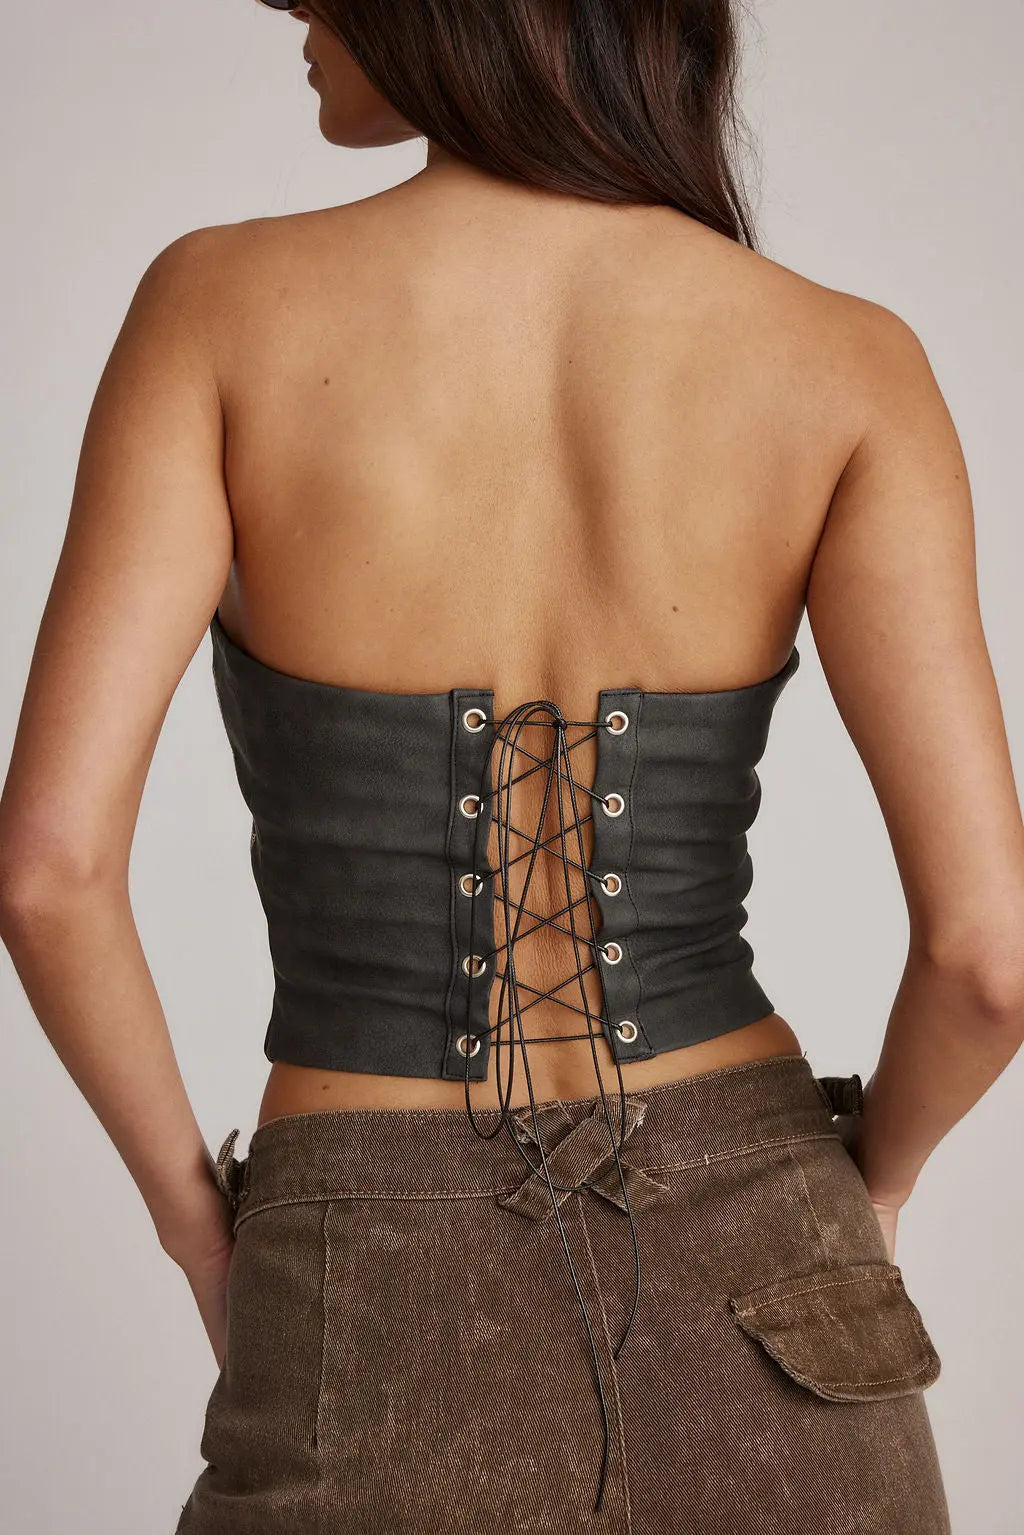 SMALL TOWN SMOKE SHOW FAUX LEATHER CORSET TOP-BLACK